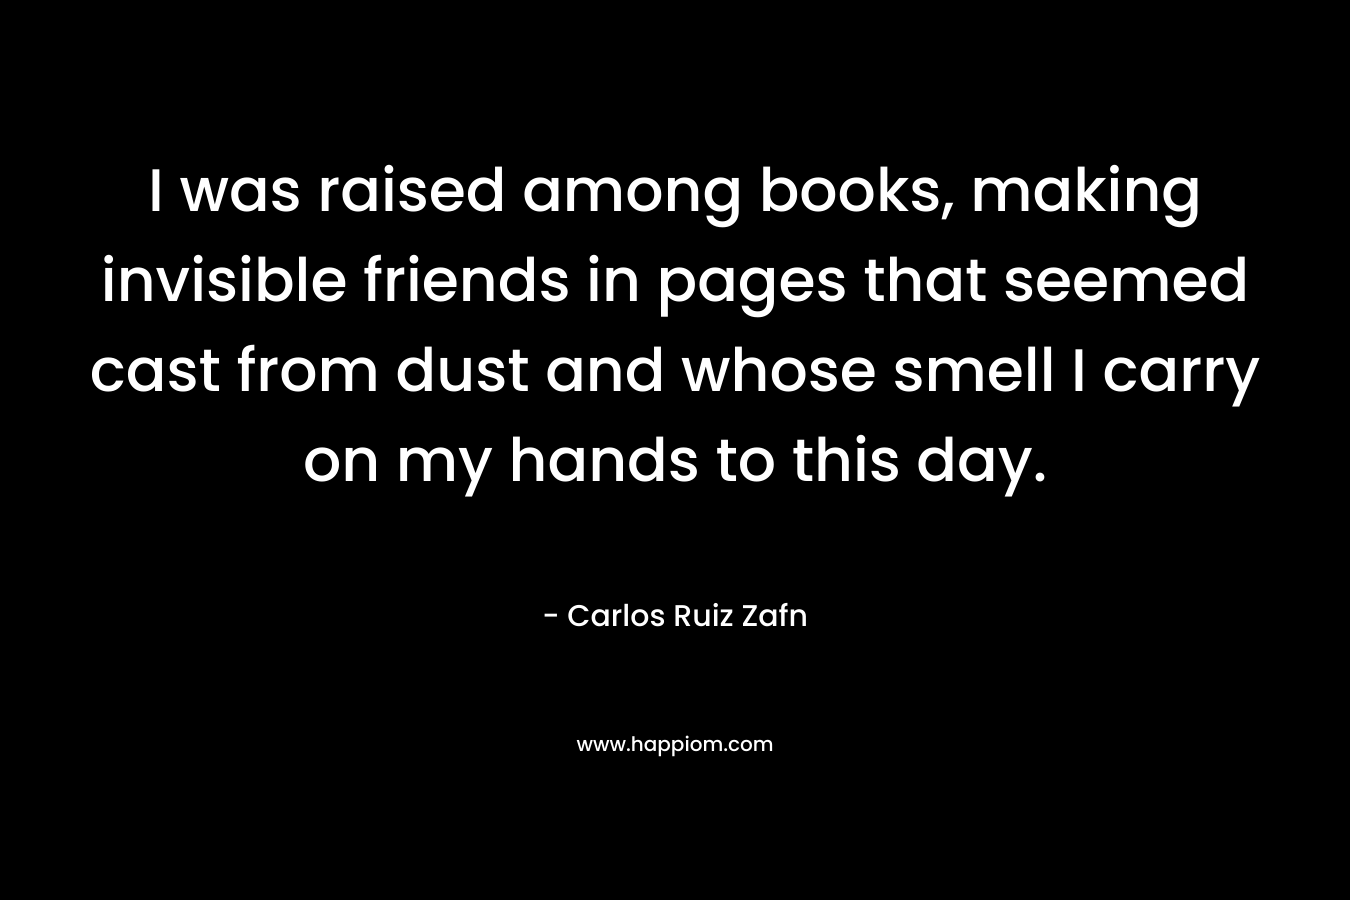 I was raised among books, making invisible friends in pages that seemed cast from dust and whose smell I carry on my hands to this day.